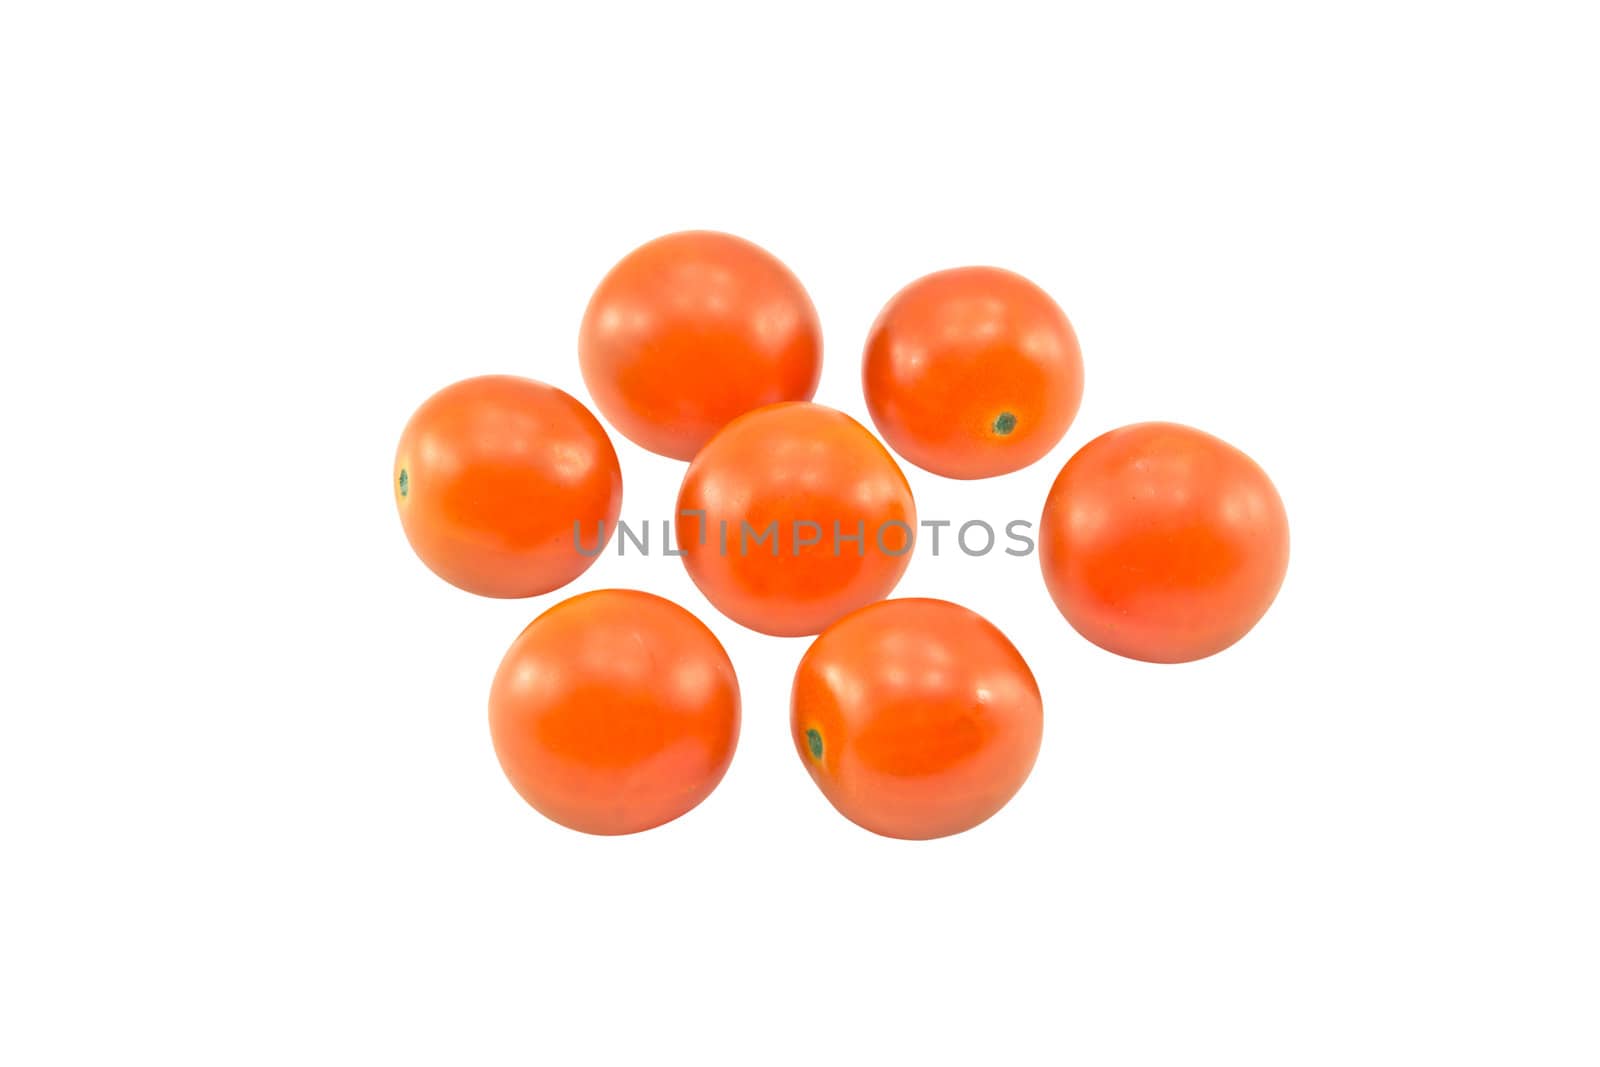 Seven tomatoes isolated on white background